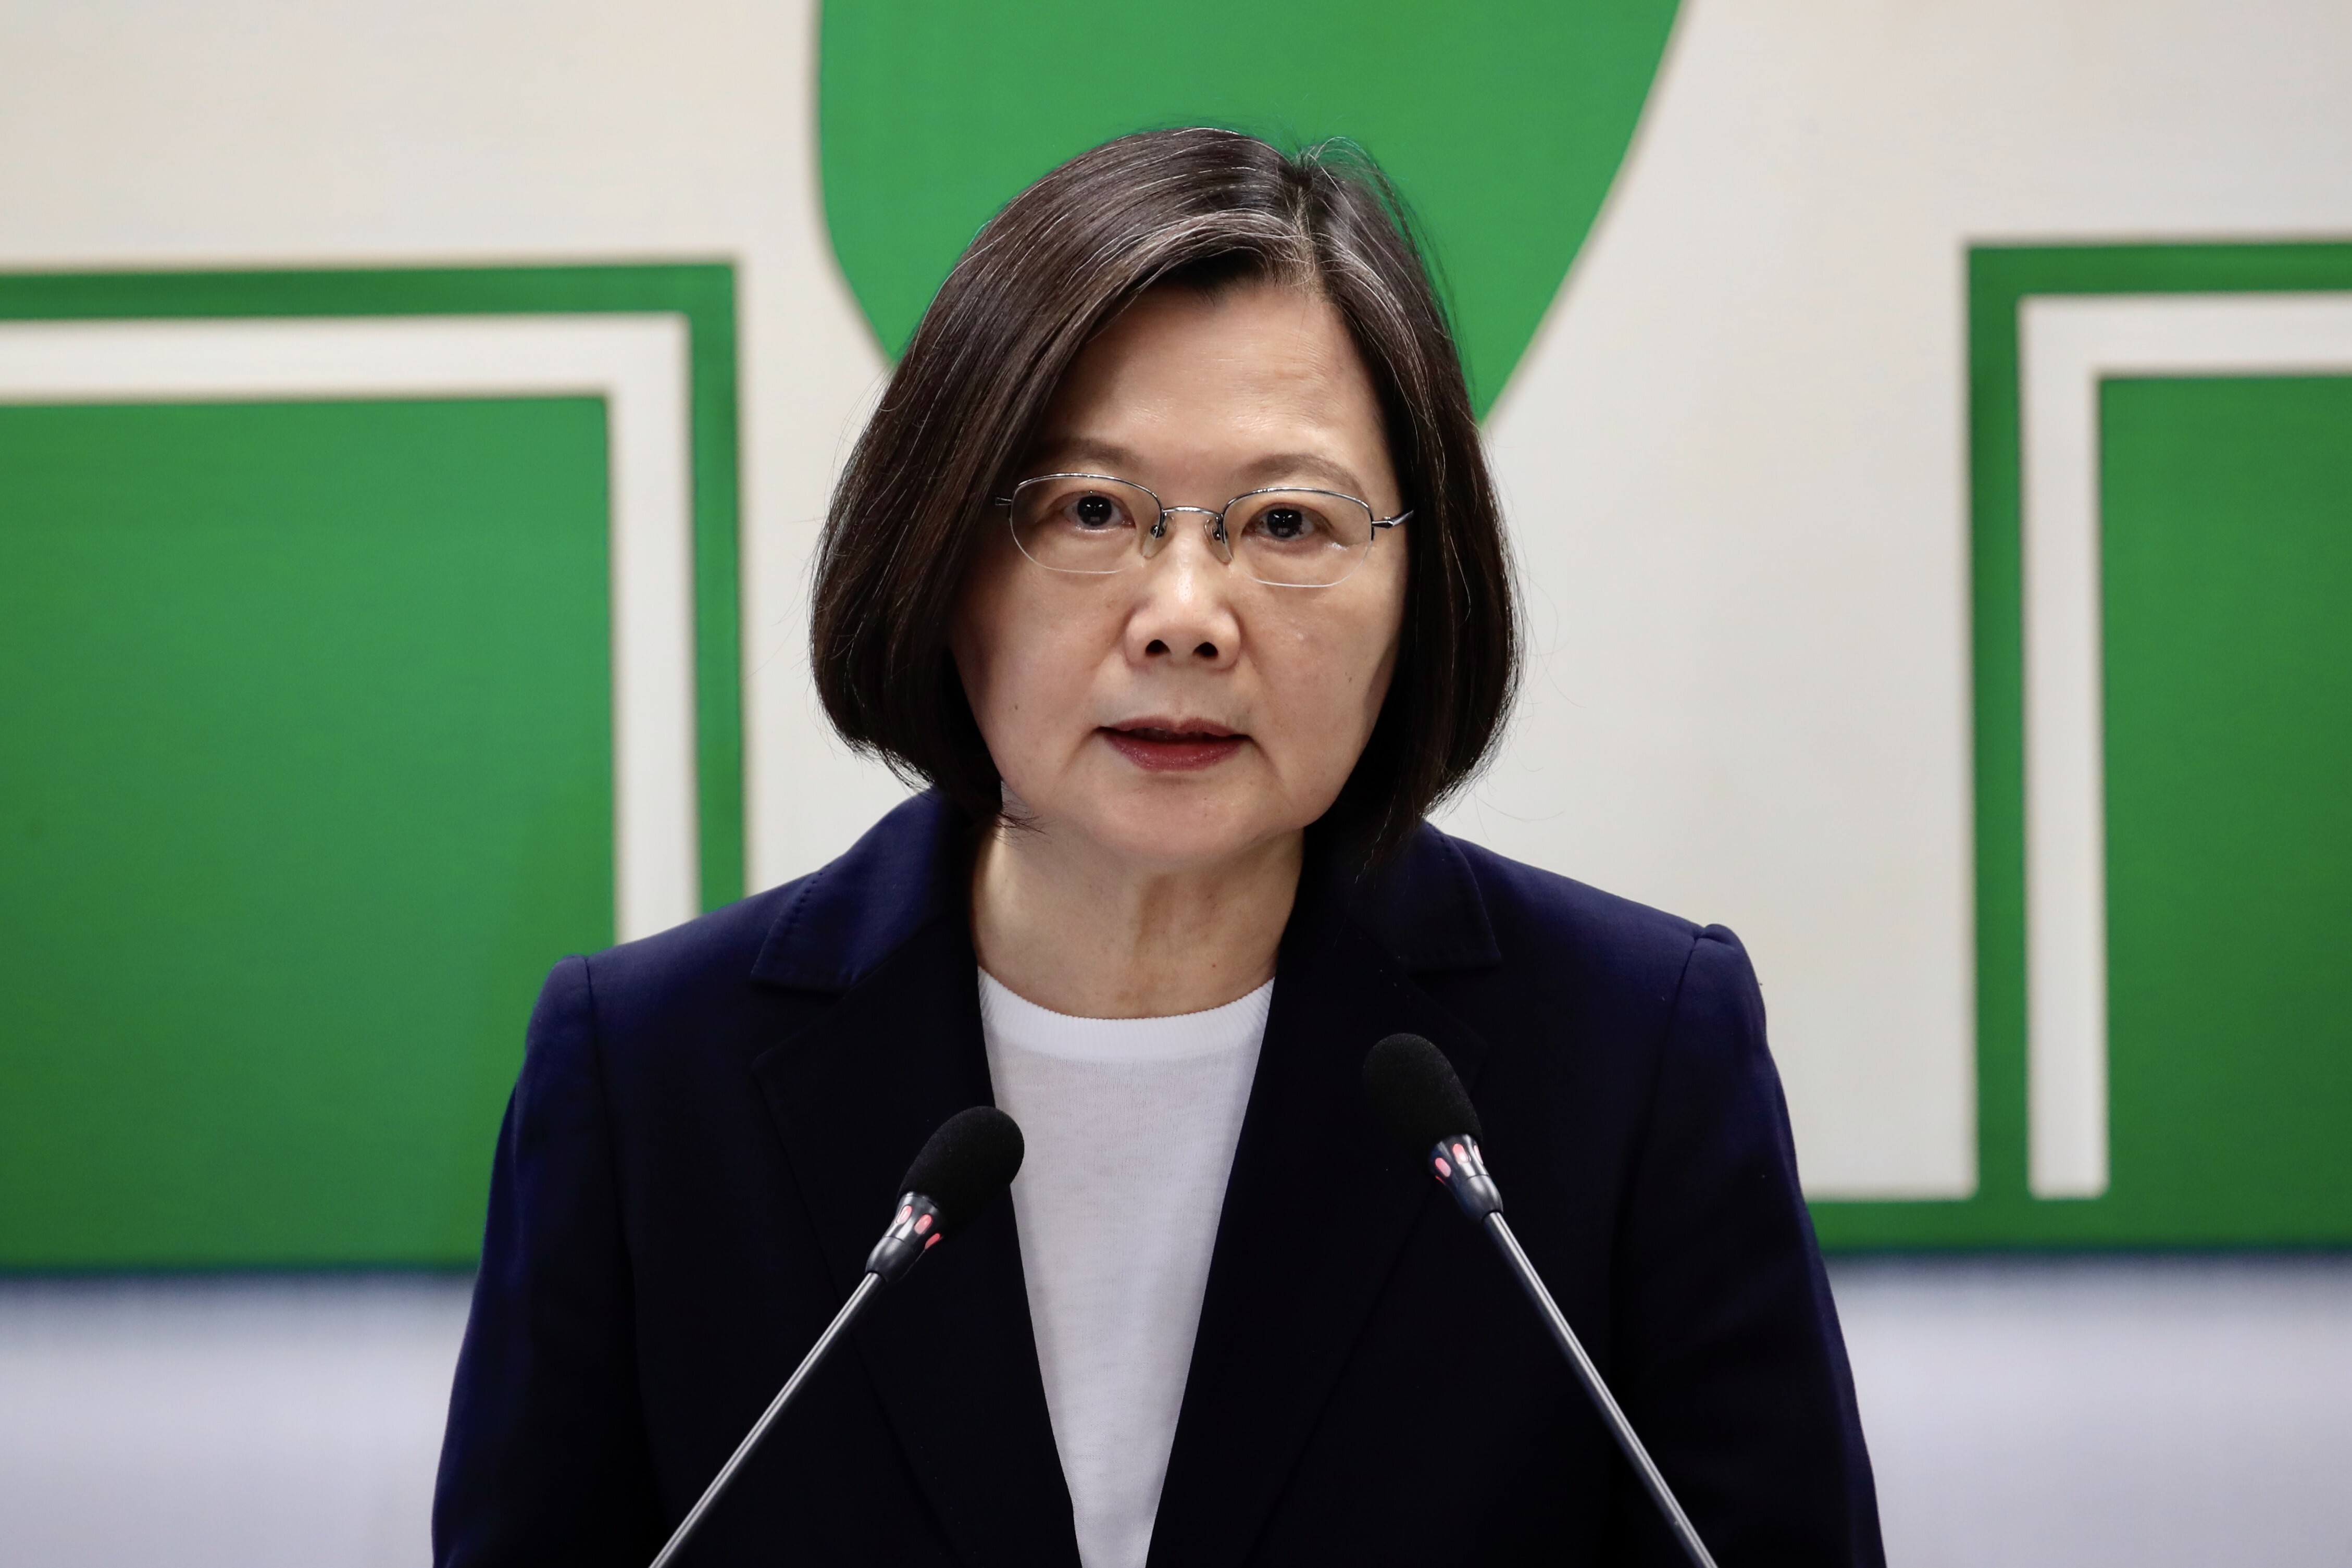 Taiwan’s presidential office says Tsai Ing-wen will offer her congratulations to the winner of the US election once it has been decided. Photo: EPA-EFE